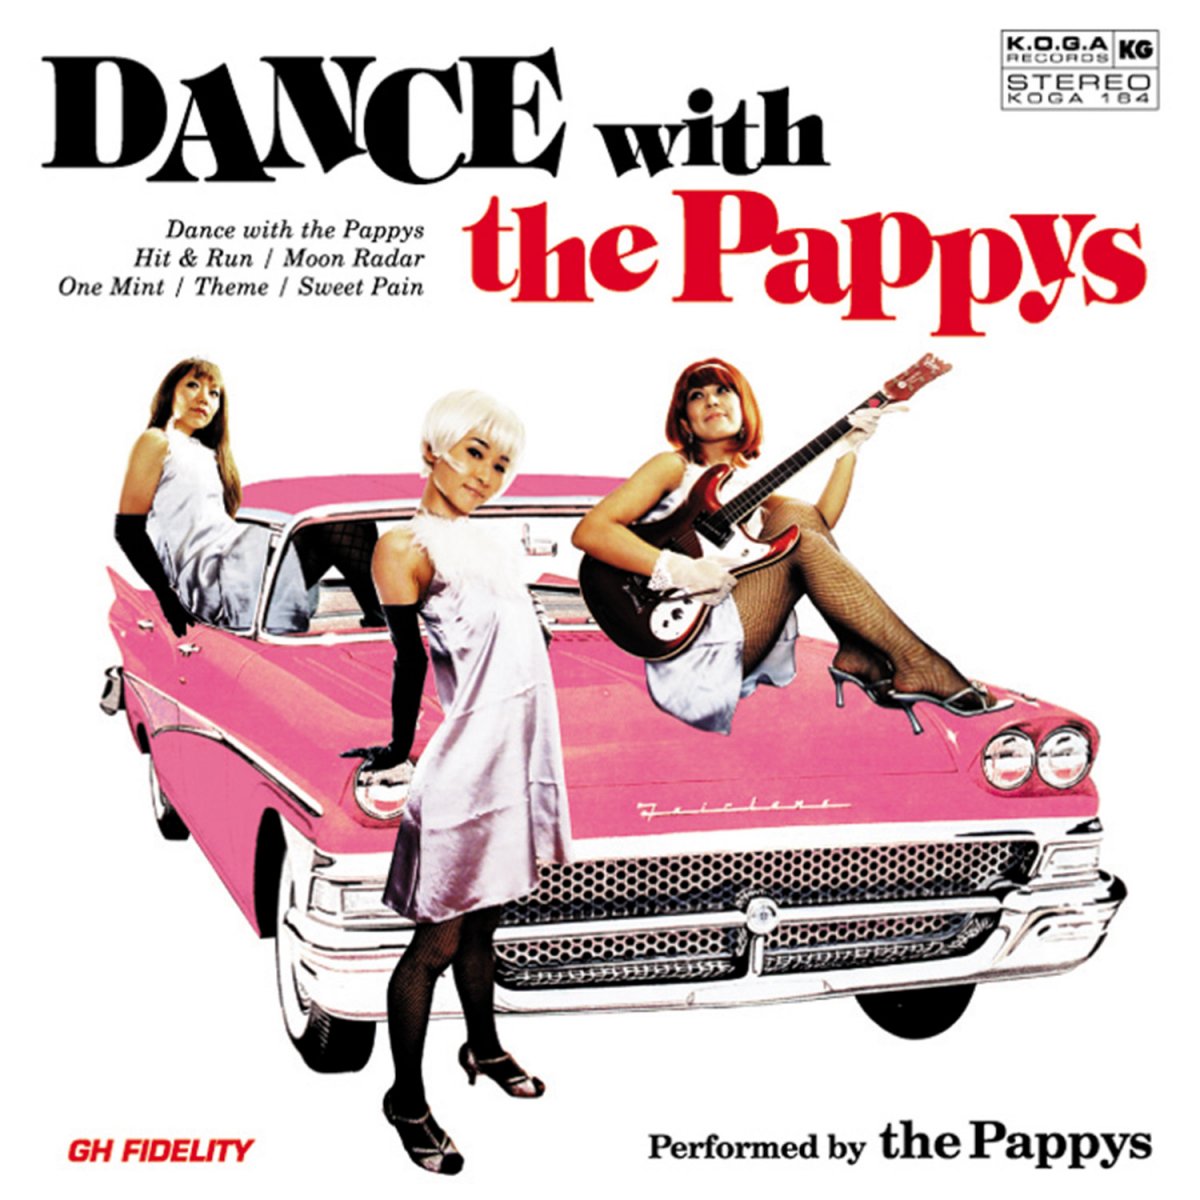 PAPPYS 「DANCE with the Pappys」(CD) - KOGA RECORDS WEB SHOP